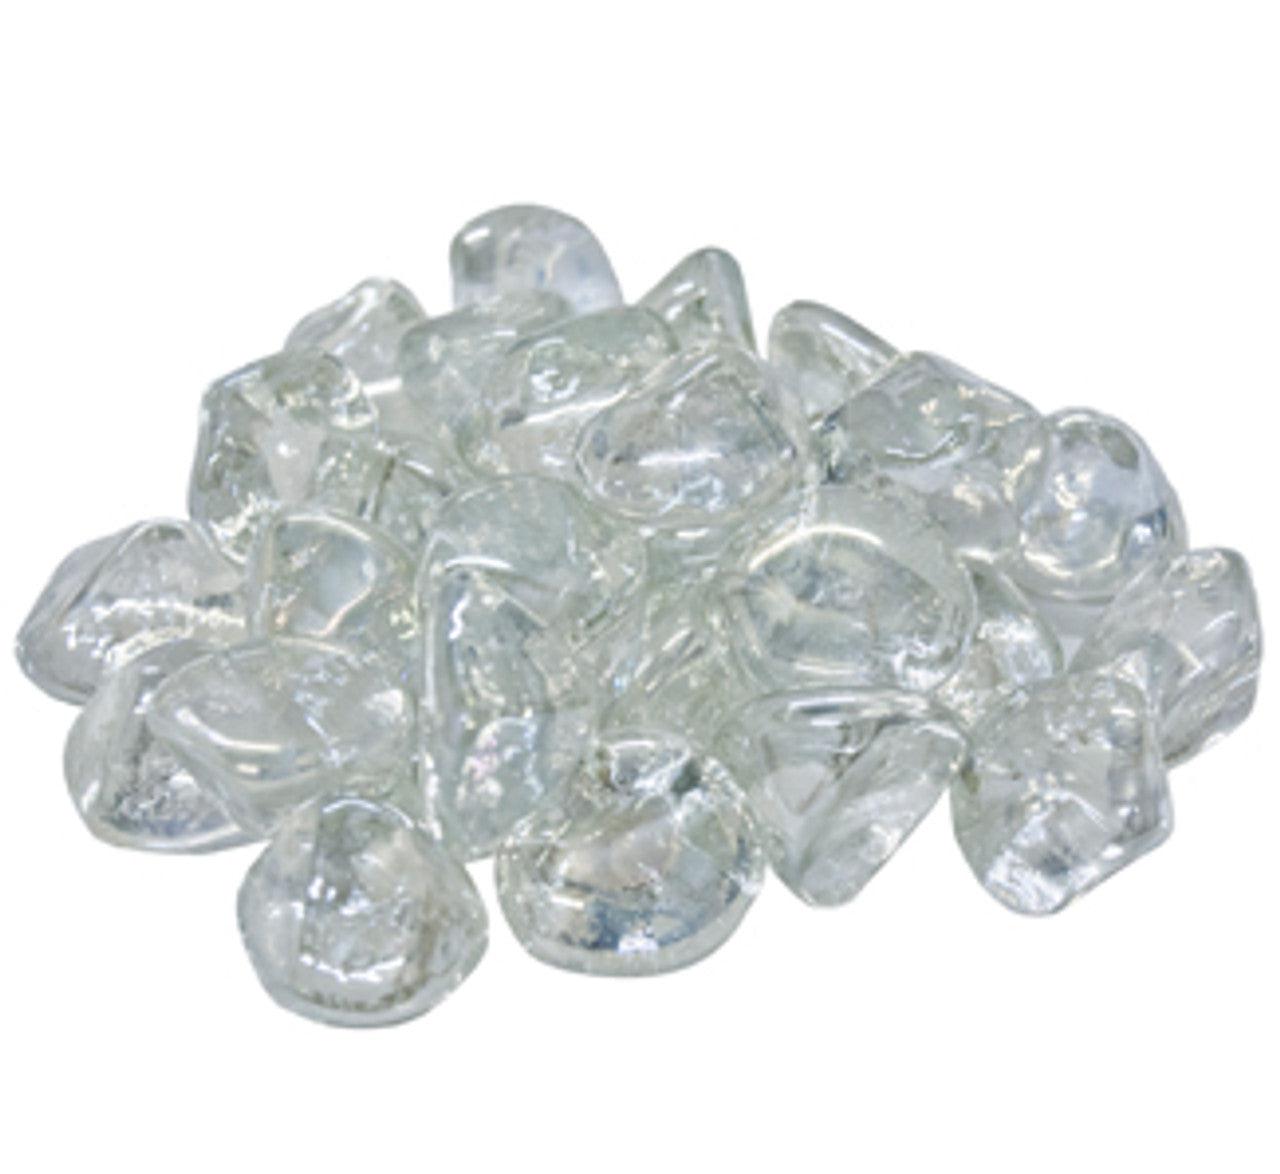 70 lb. Package of Diamond Nuggets Glass Media